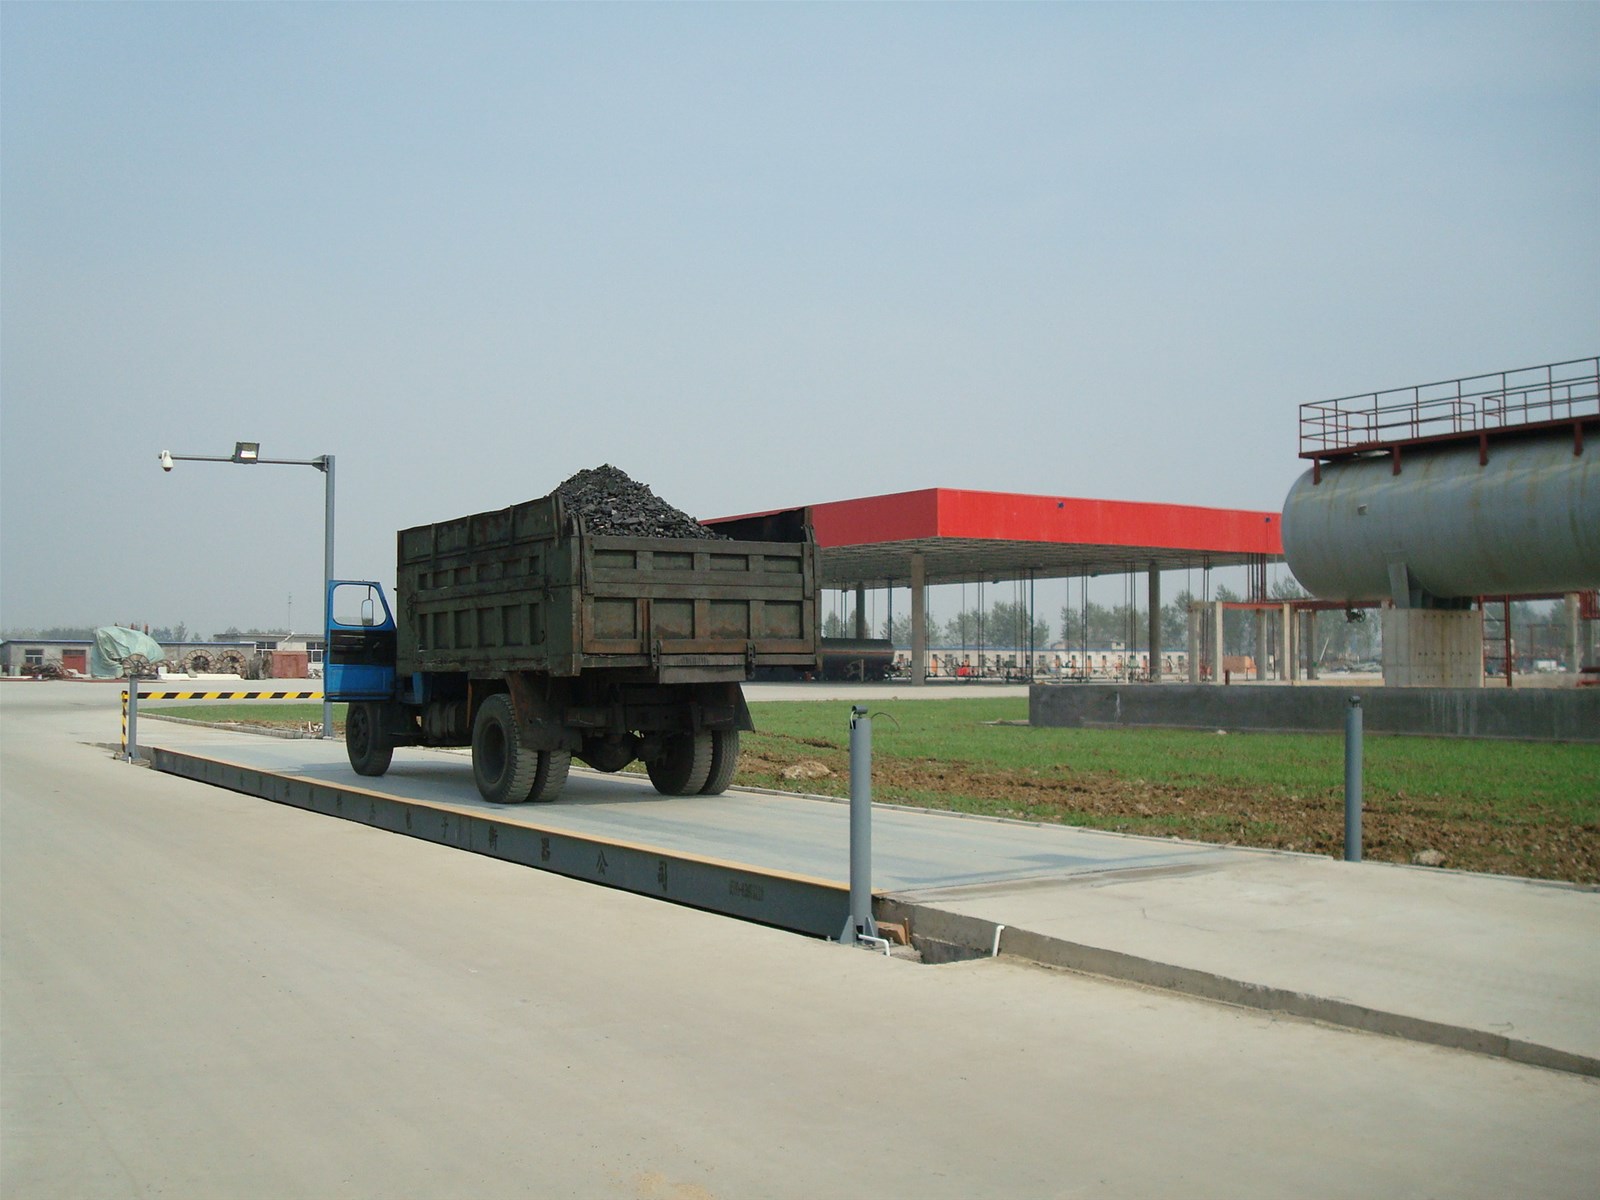 80t Steel Structure Deck Weighing Truck Scale from China